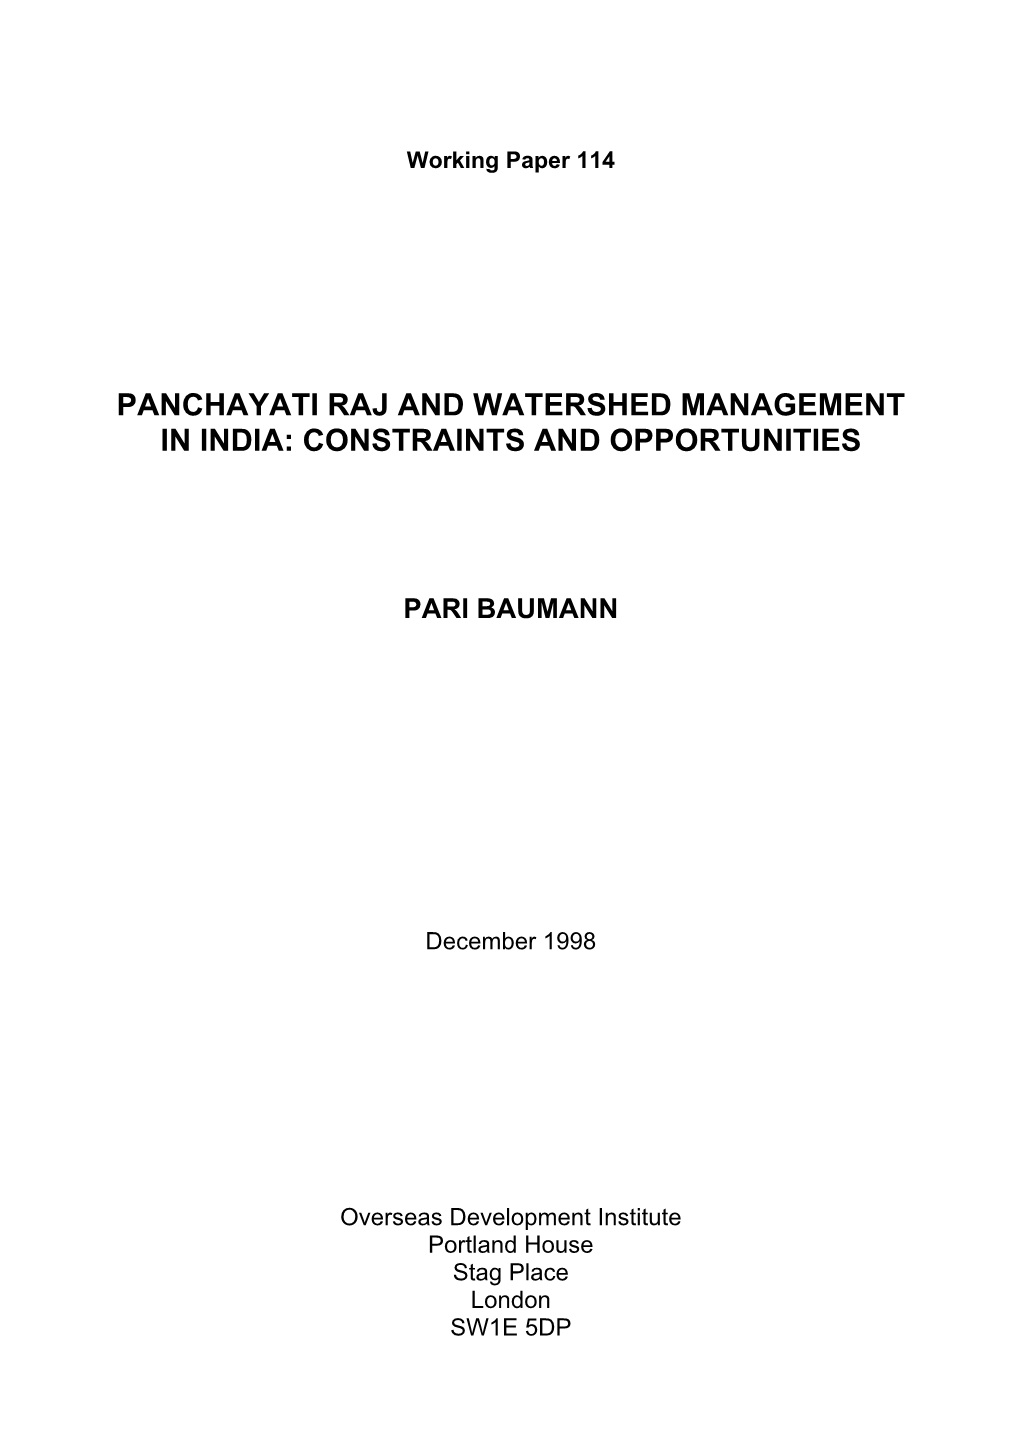 Panchayati Raj and Watershed Management in India: Constraints and Opportunities